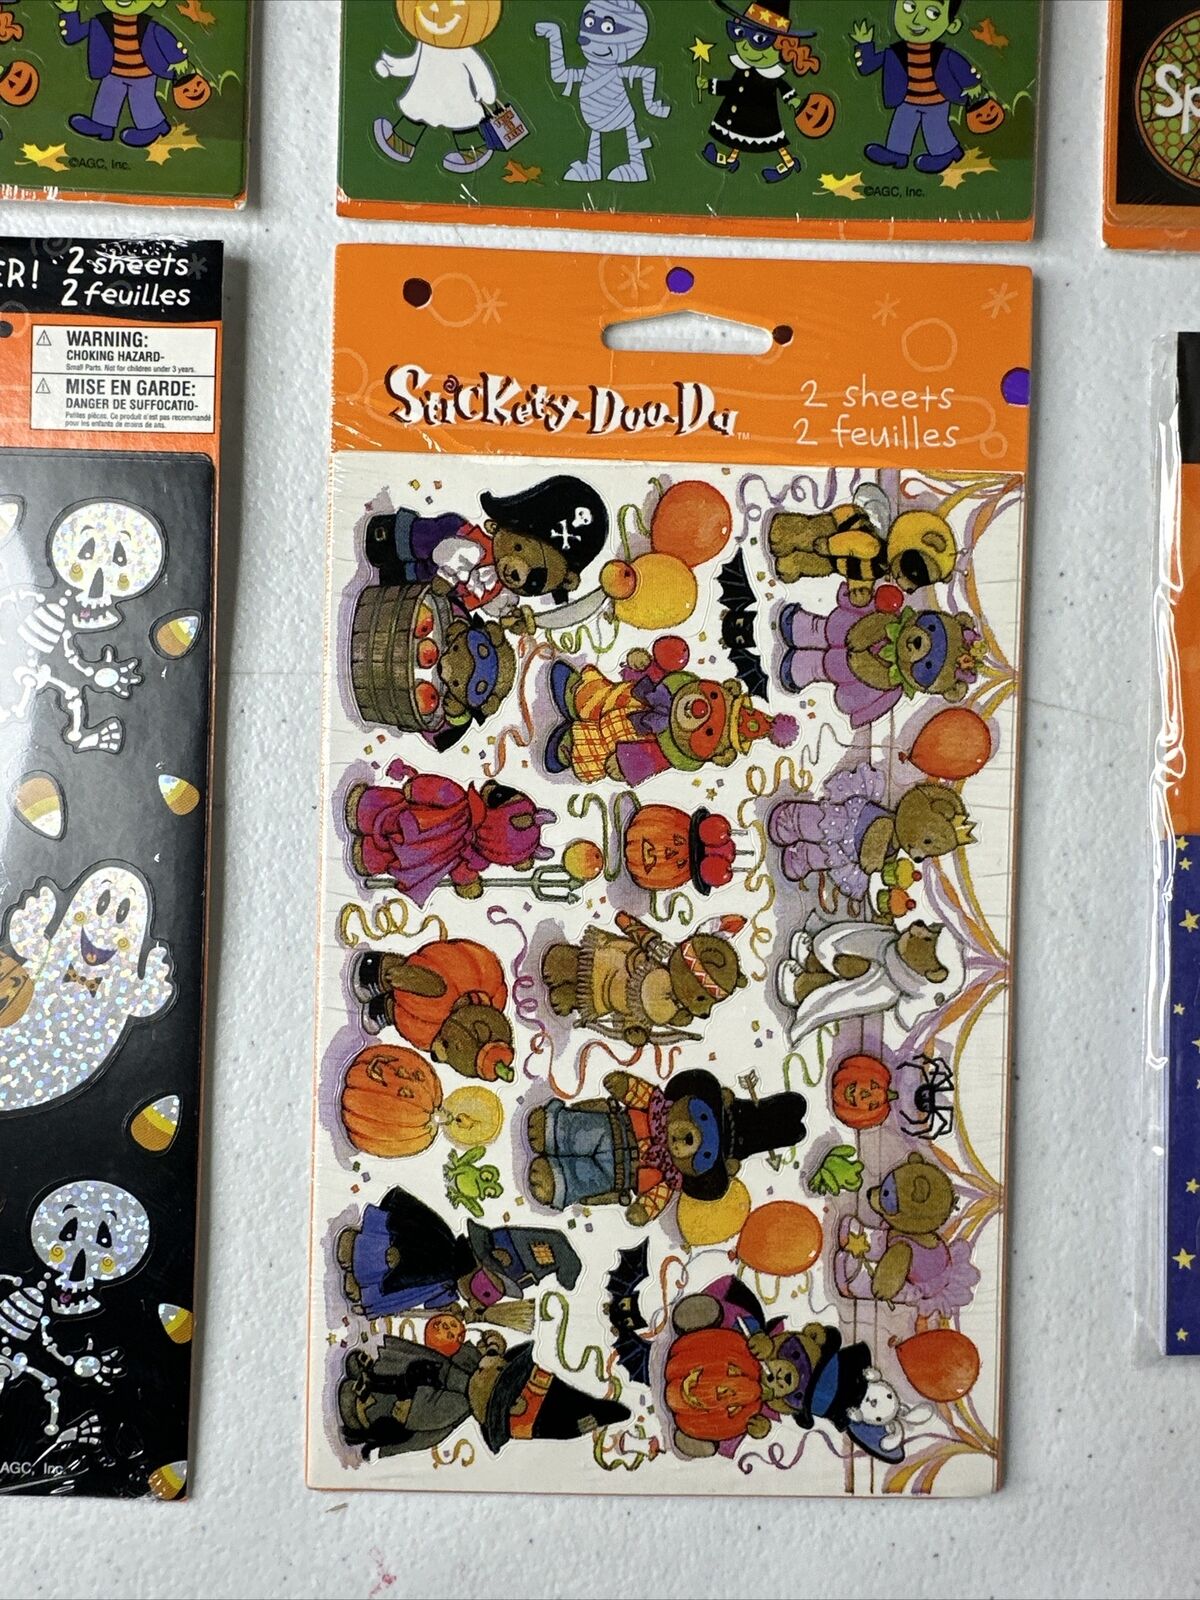 Set of Vintage Halloween Stickers by American Greetings and Stickety-Doo-Da - Retro Collectible Lot - TreasuTiques